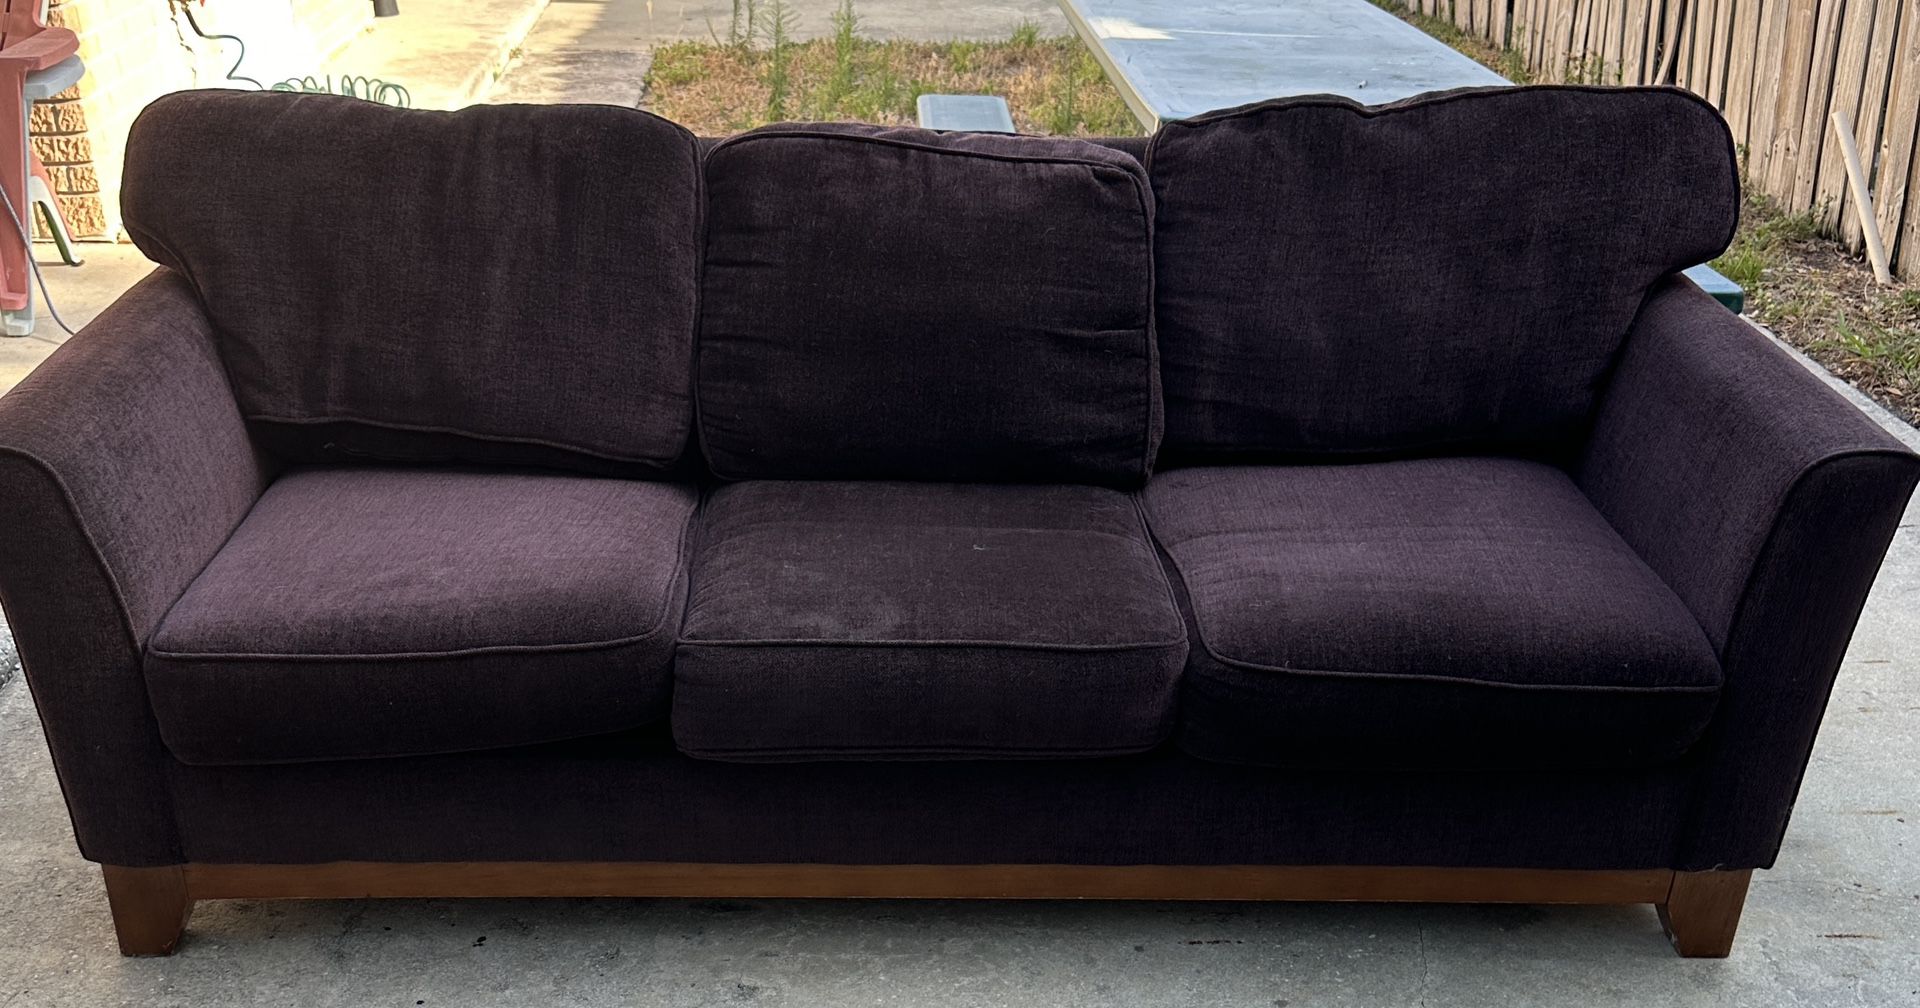 Free Brown Hide-a-bed 3 Seater Sofa Couch 